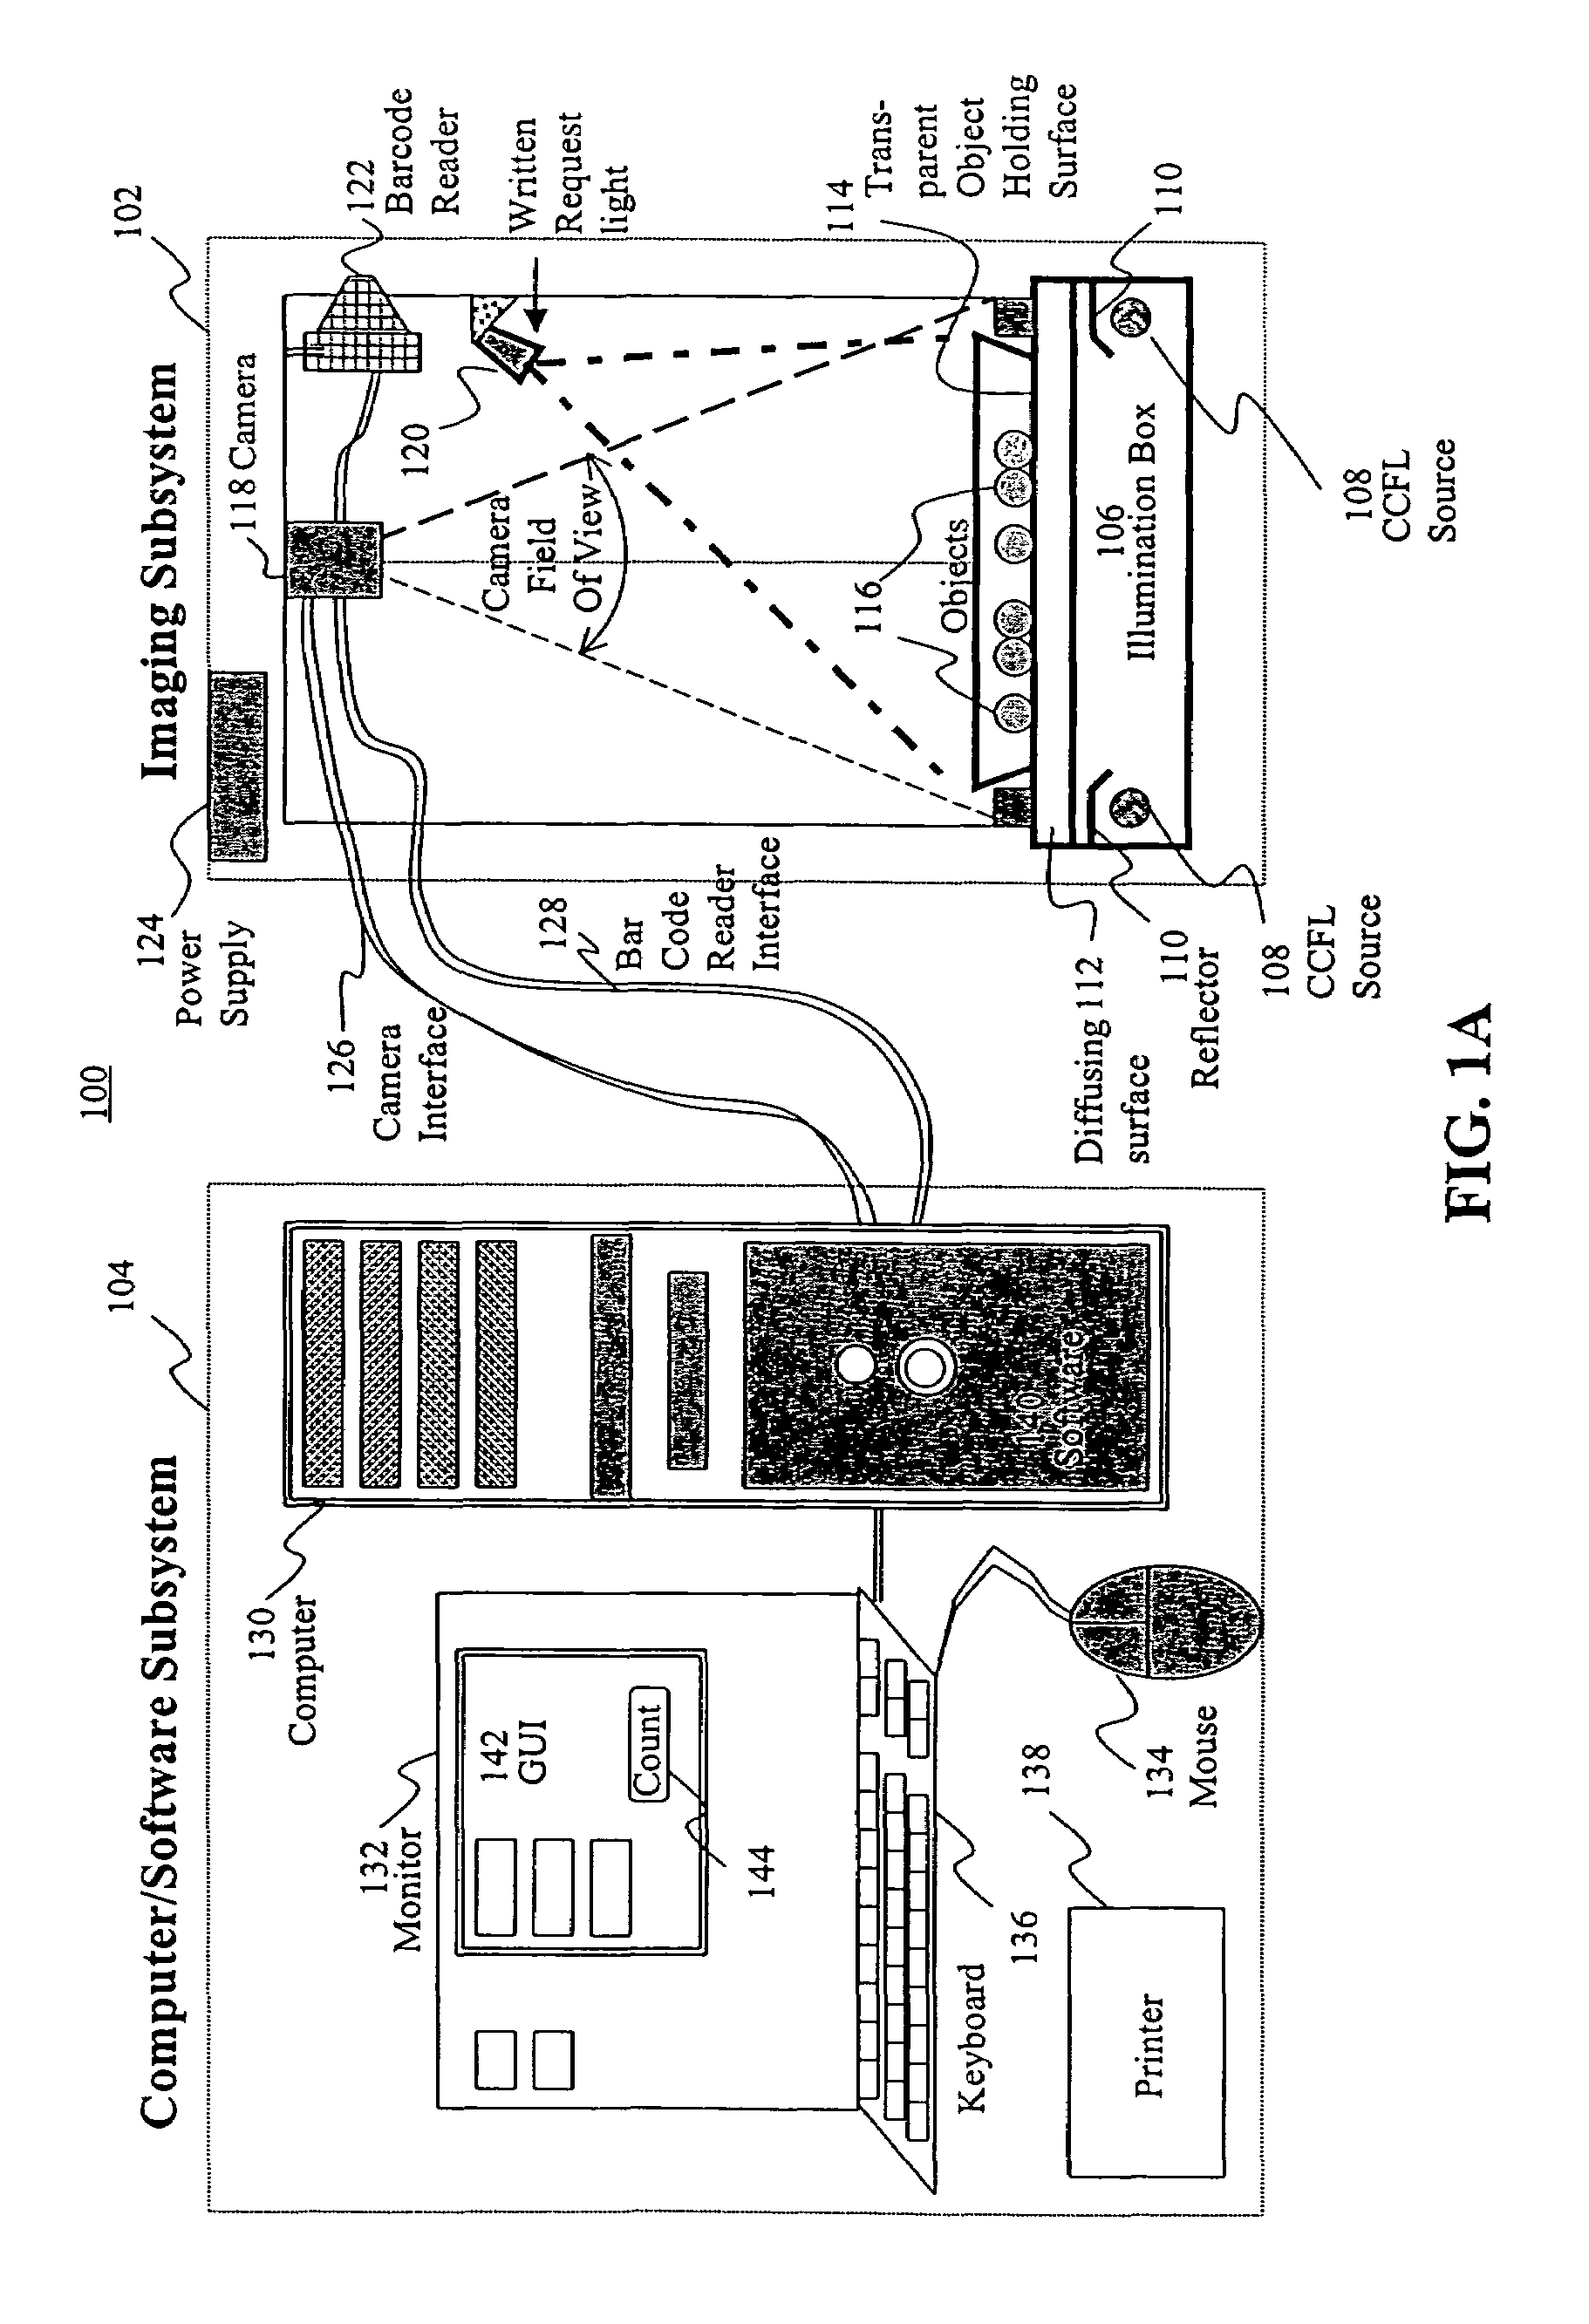 Automatic digital object counting and verification system and associated method